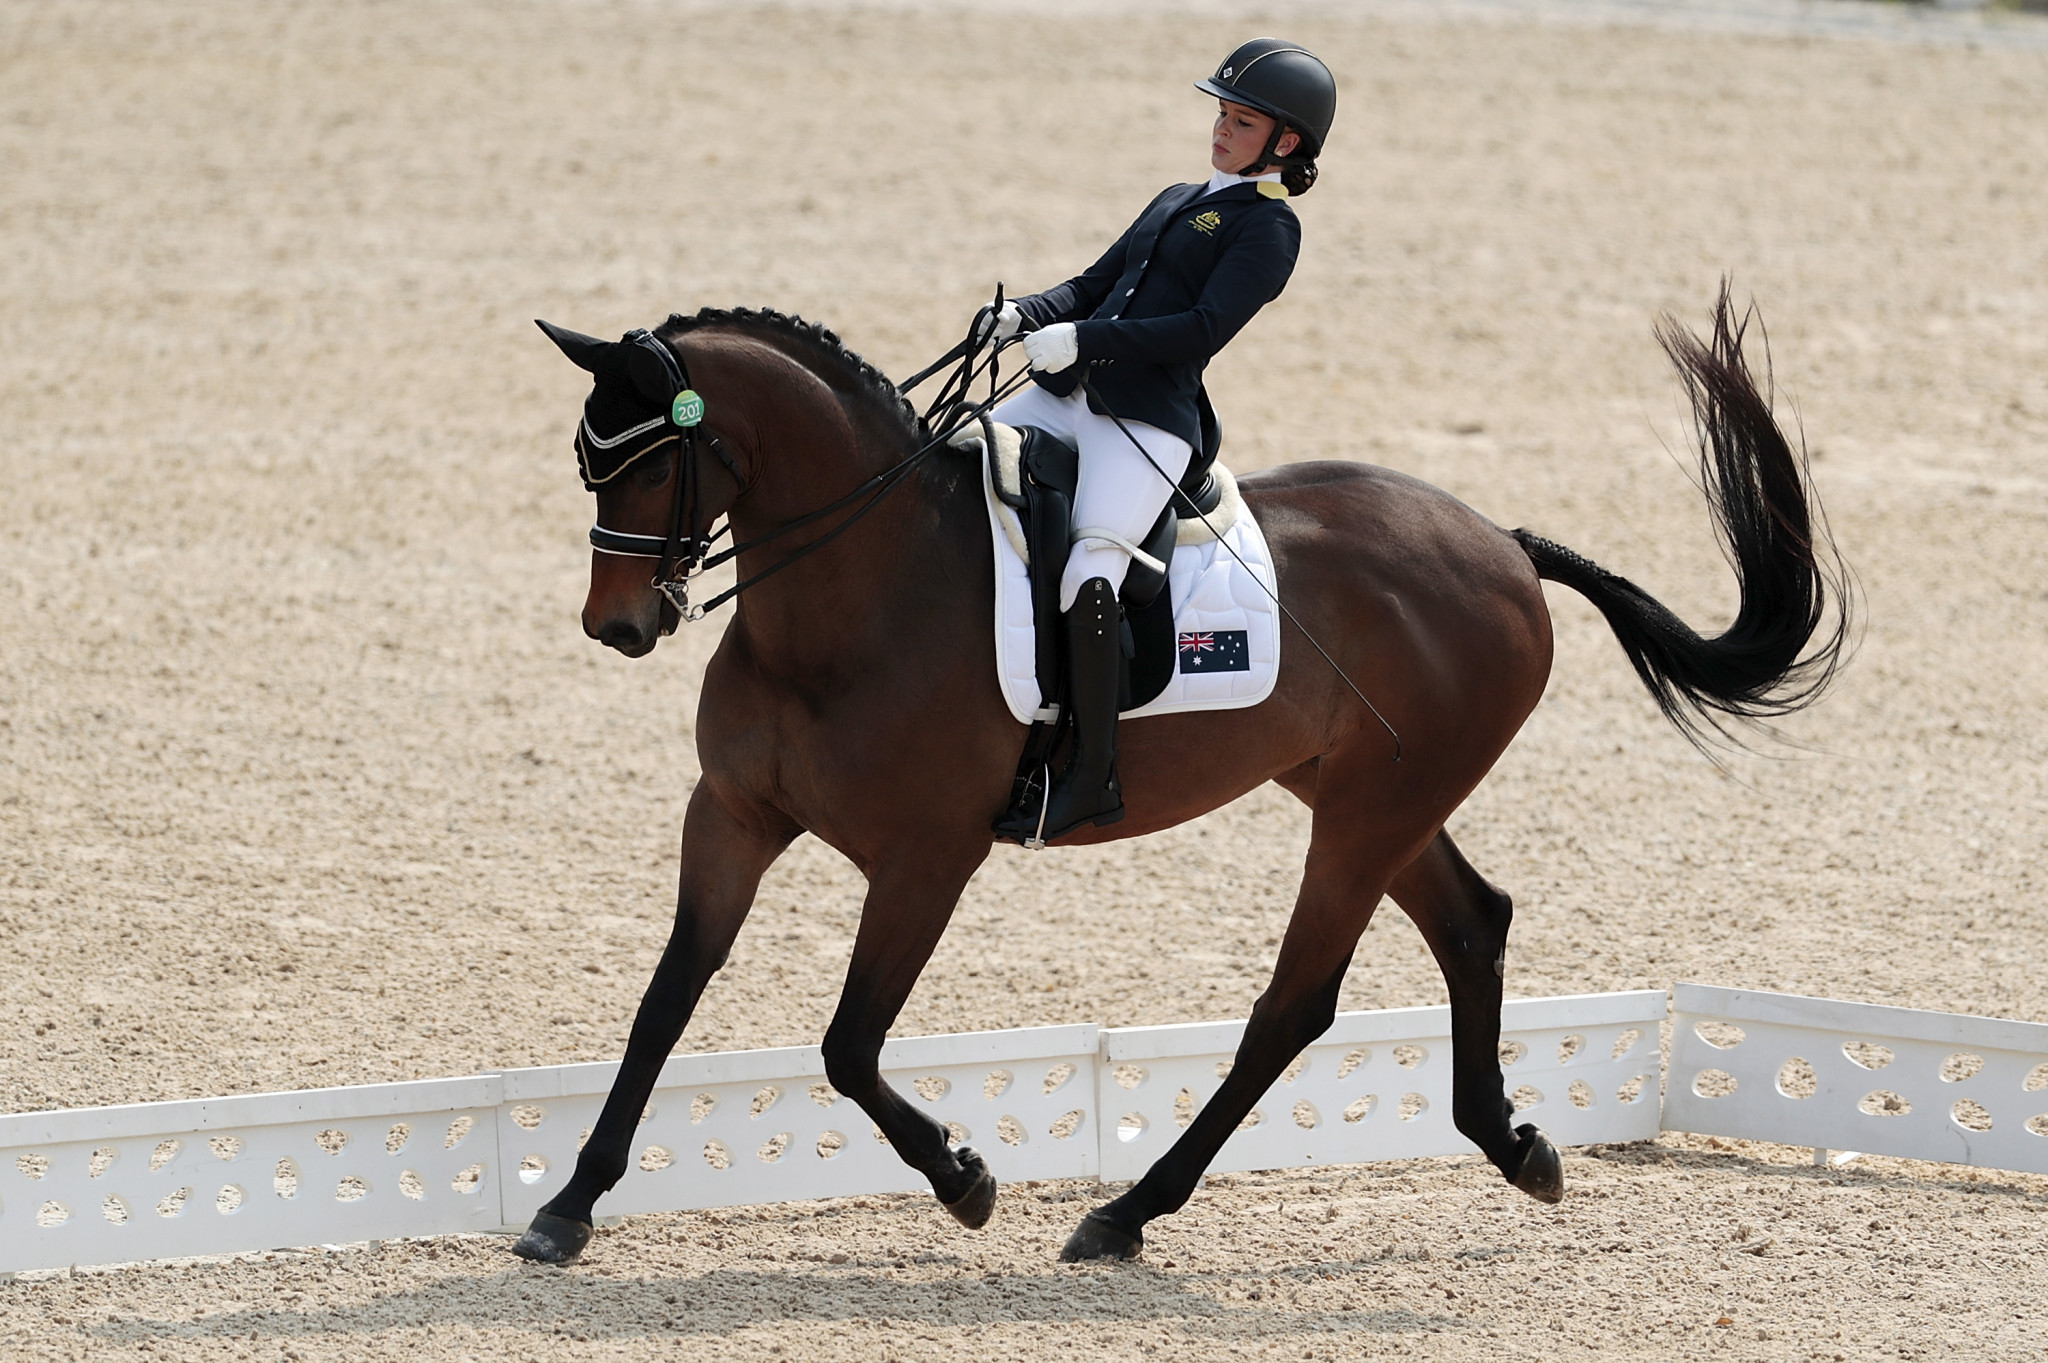 The dressage team event at the Tokyo 2020 Paralympics will take on a different format ©Getty Images